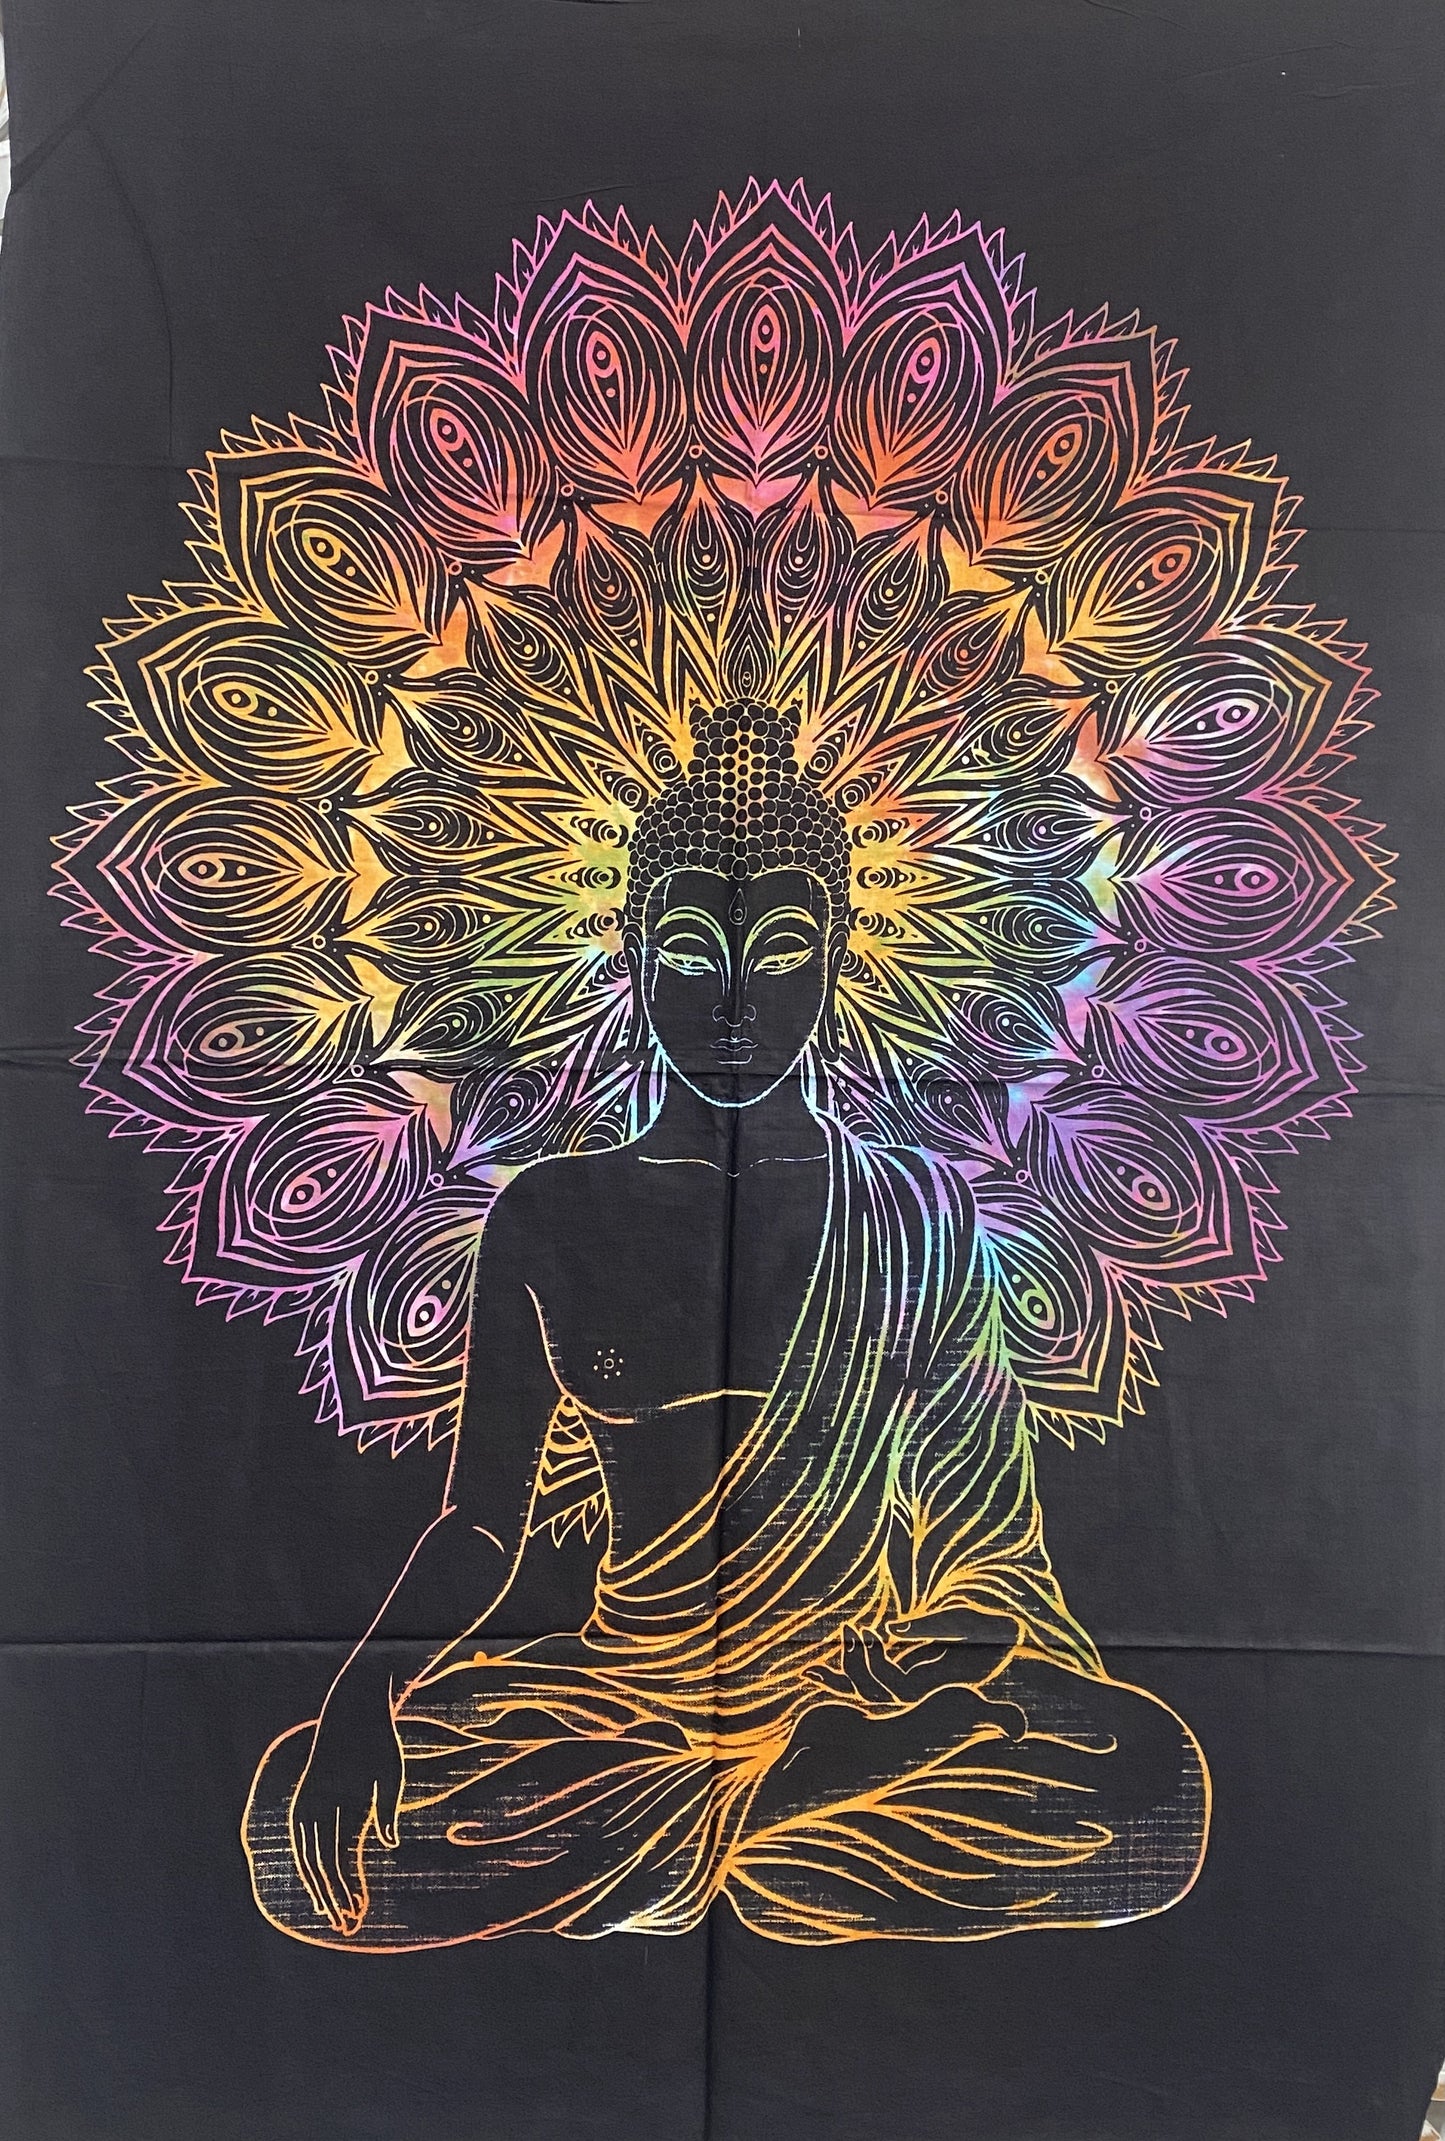 Hand printed Fabric Posters Mini Buddha Tapestries Wall Hangings - Available in 2 Colors